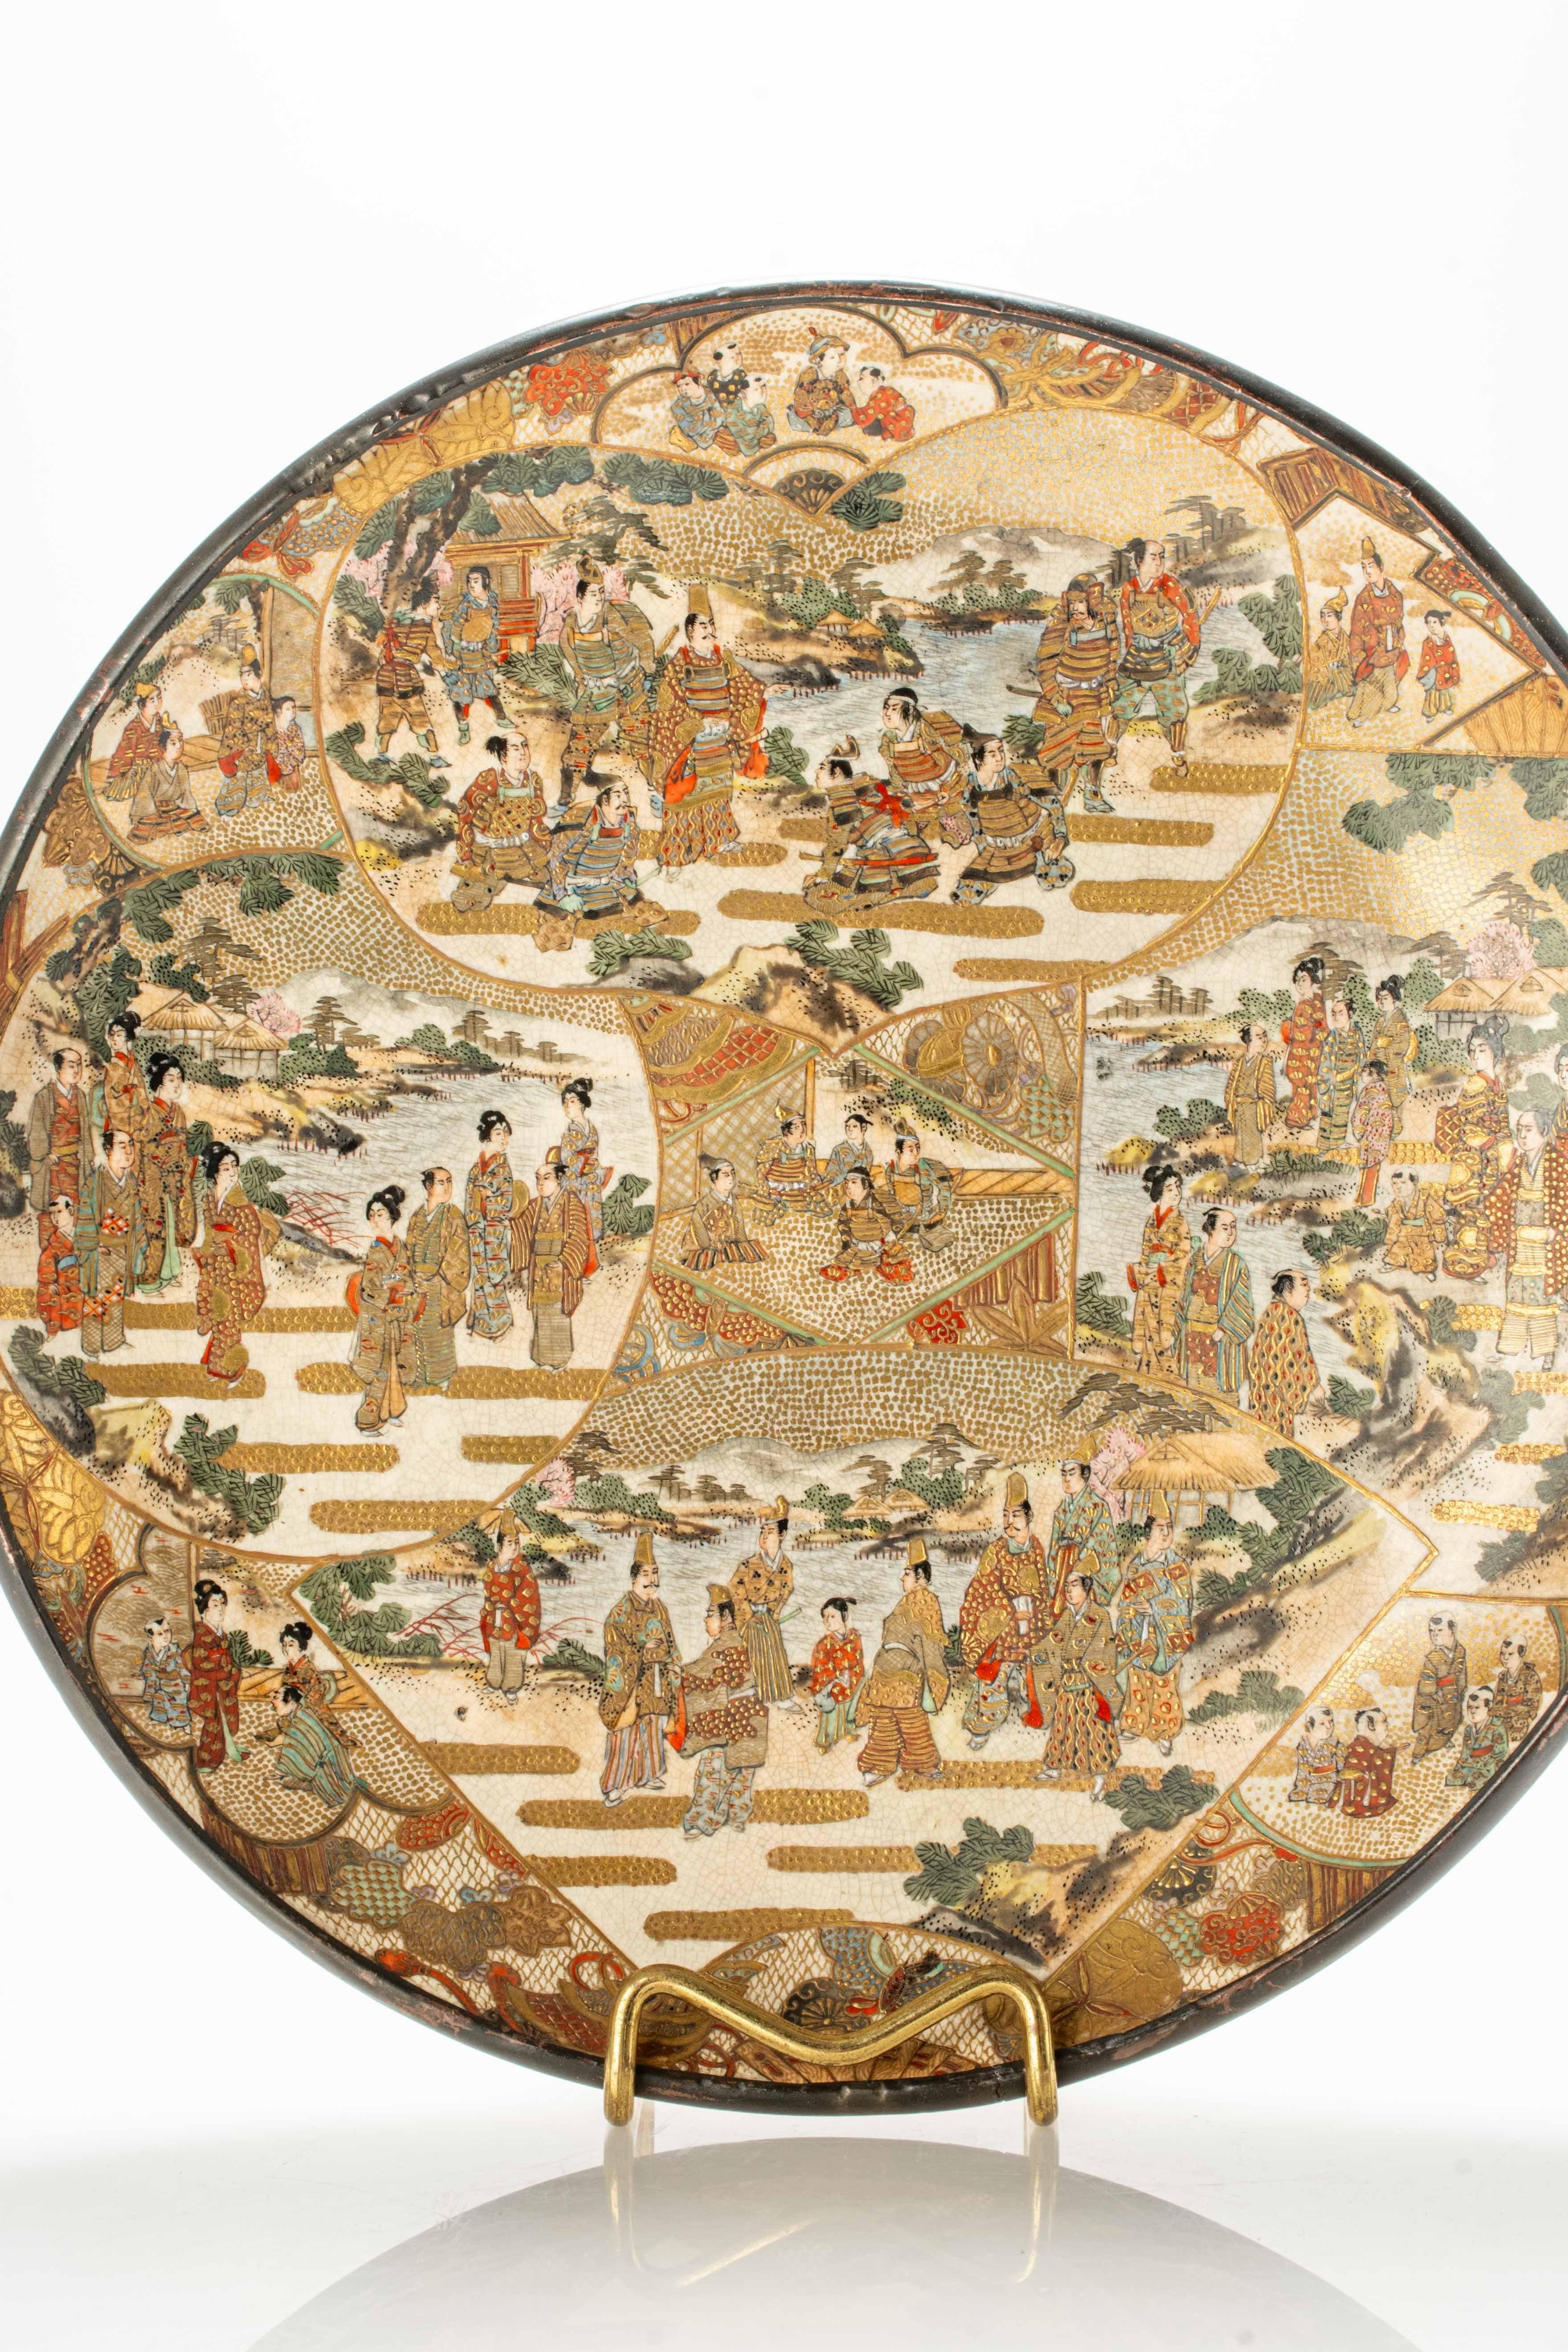 Satsuma ceramic plate adorned with polychrome and gold decorations within numerous reserves of unique shape and size, depicting scenes of Japanese daily life.

The plate is signed under the base 'Dai Nihon Yokohama Hotoda shōten seizō'.

Origin: